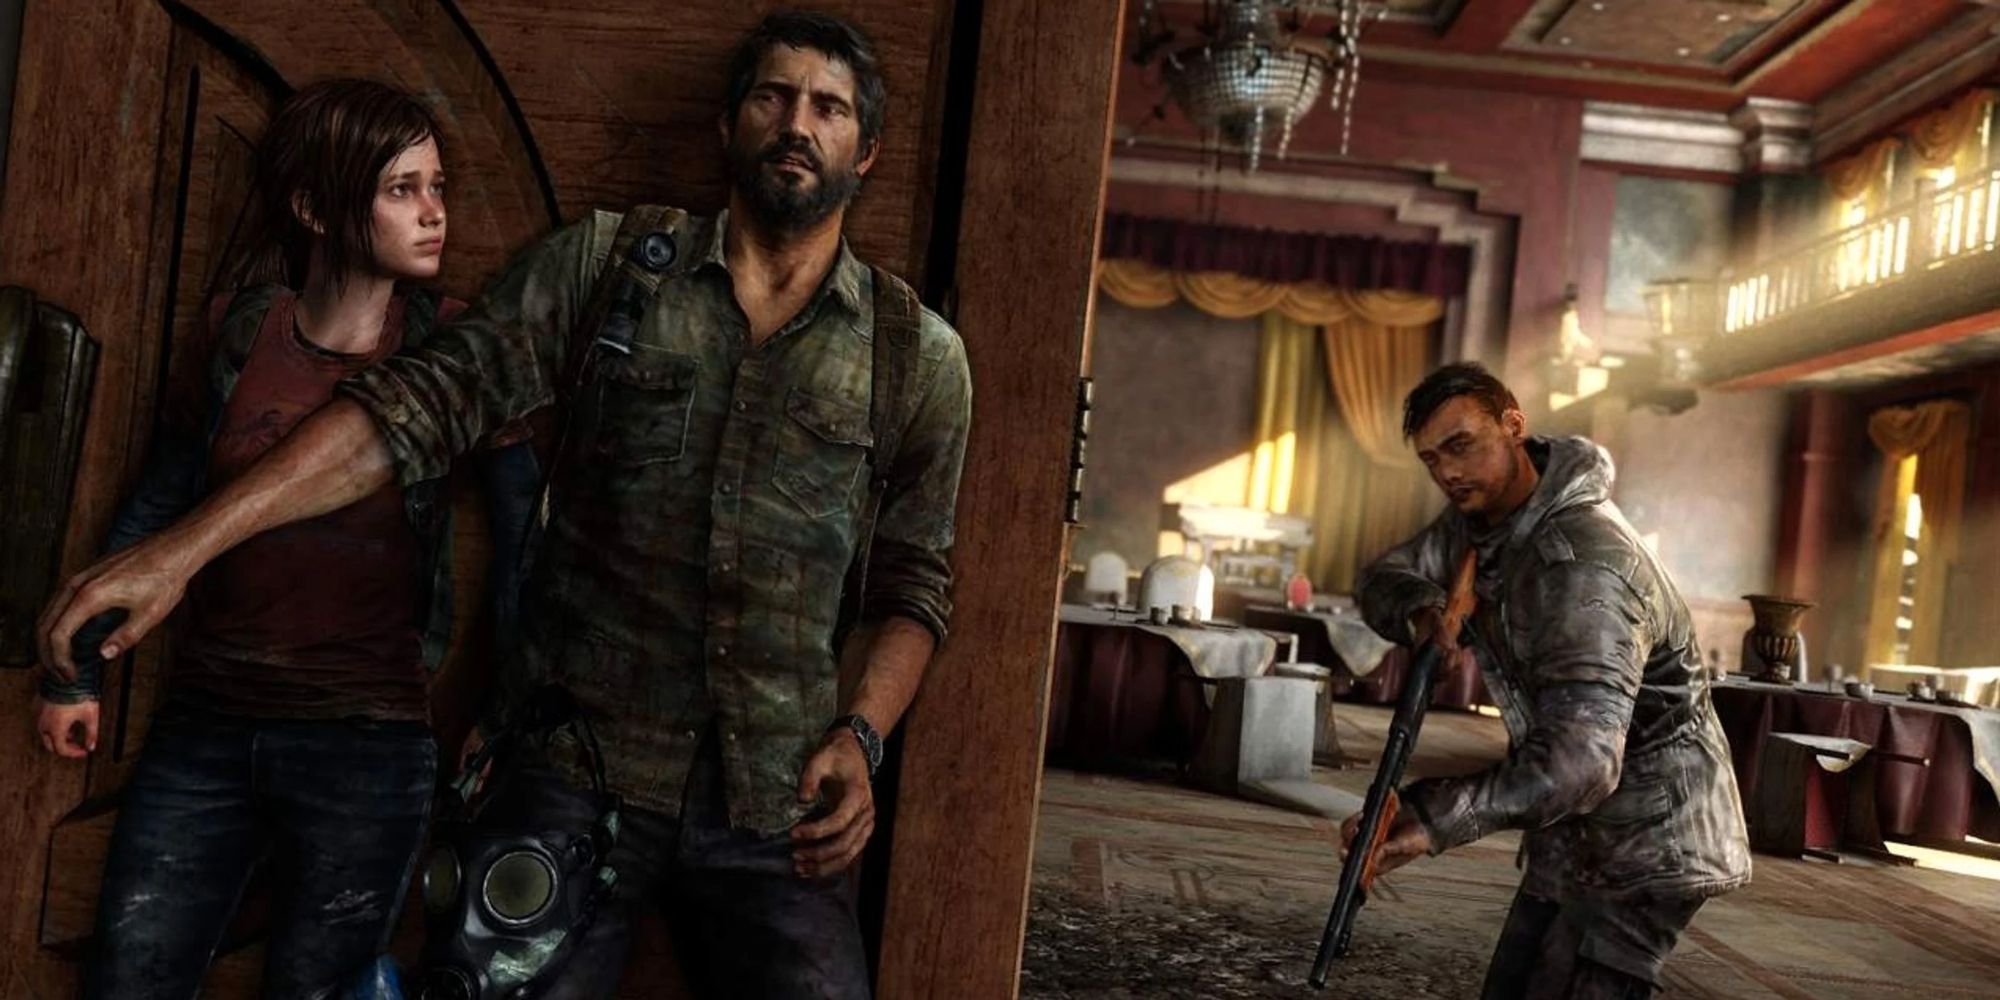 The Last of Us Set Video Teases Show's Possible Hunters Scene